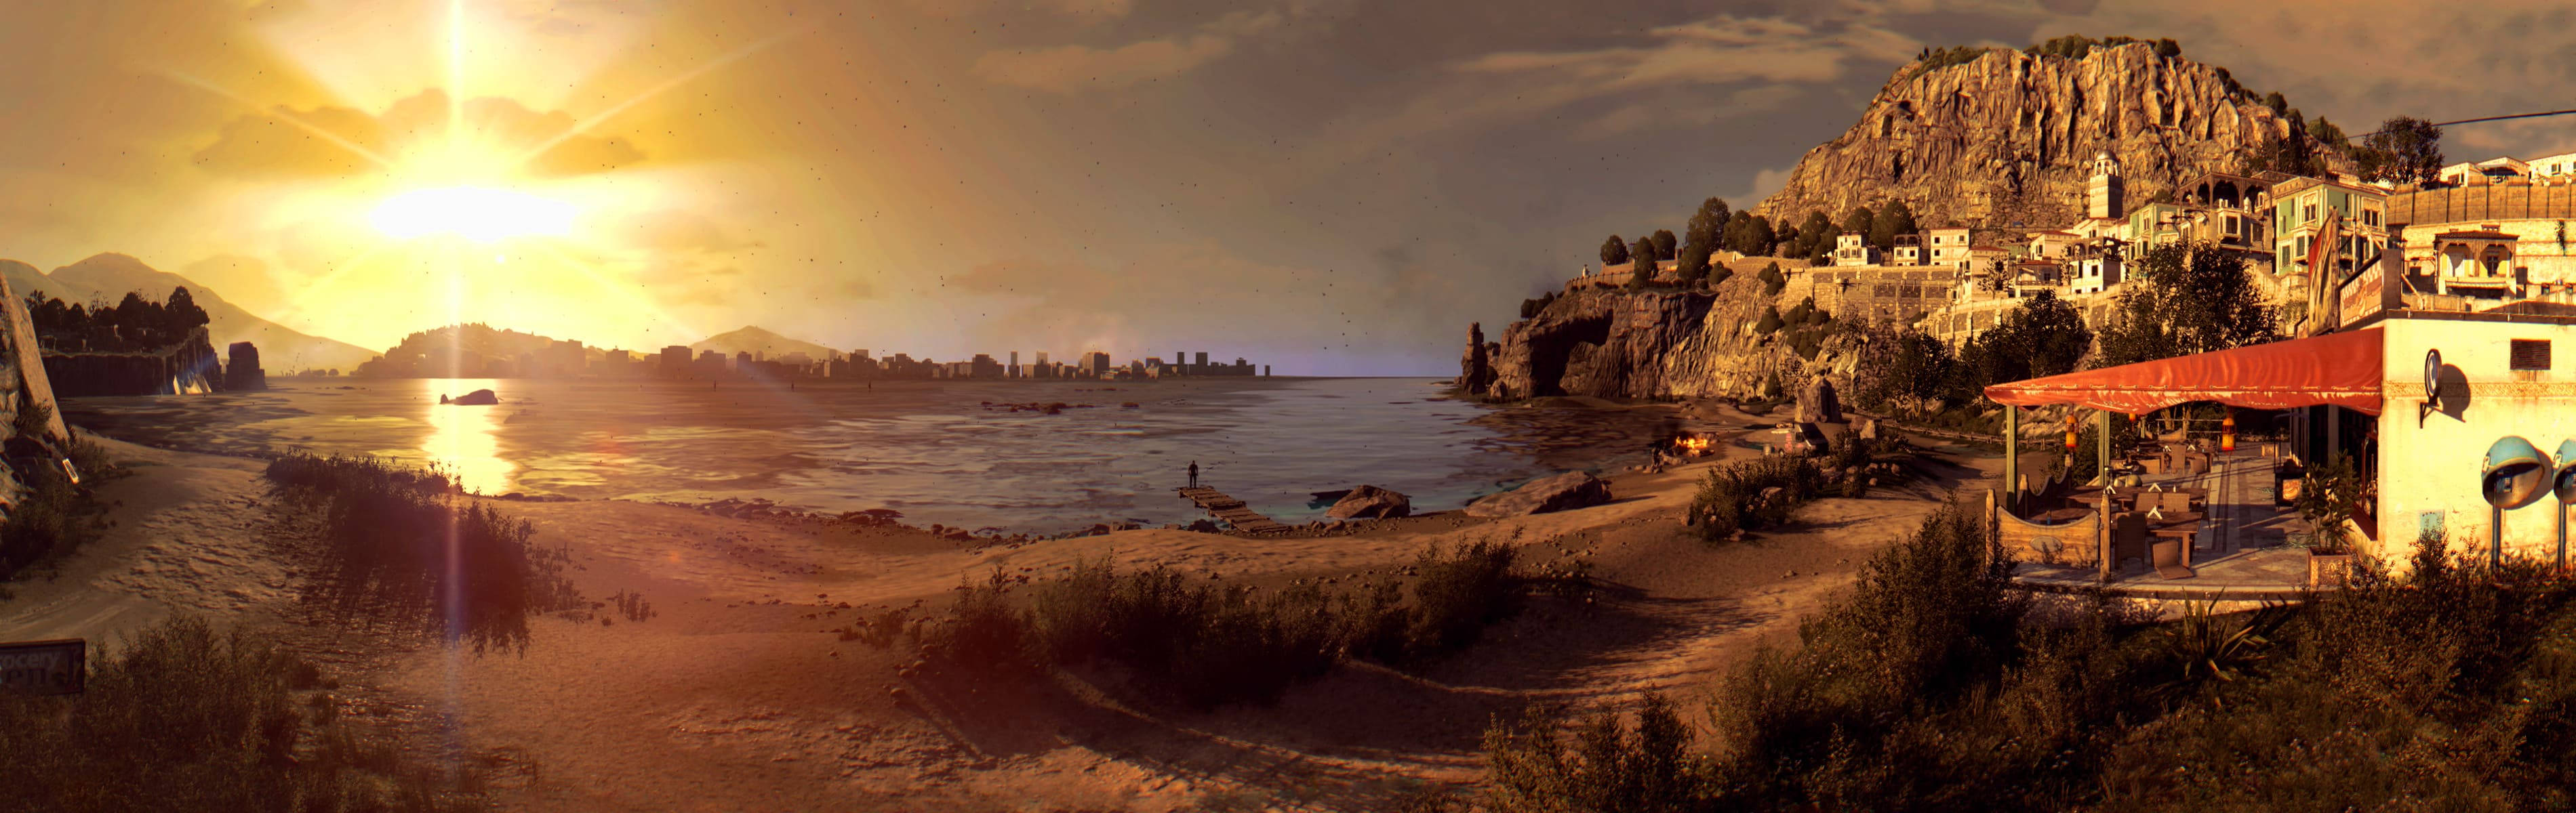 Dying Light Sunrise View Background